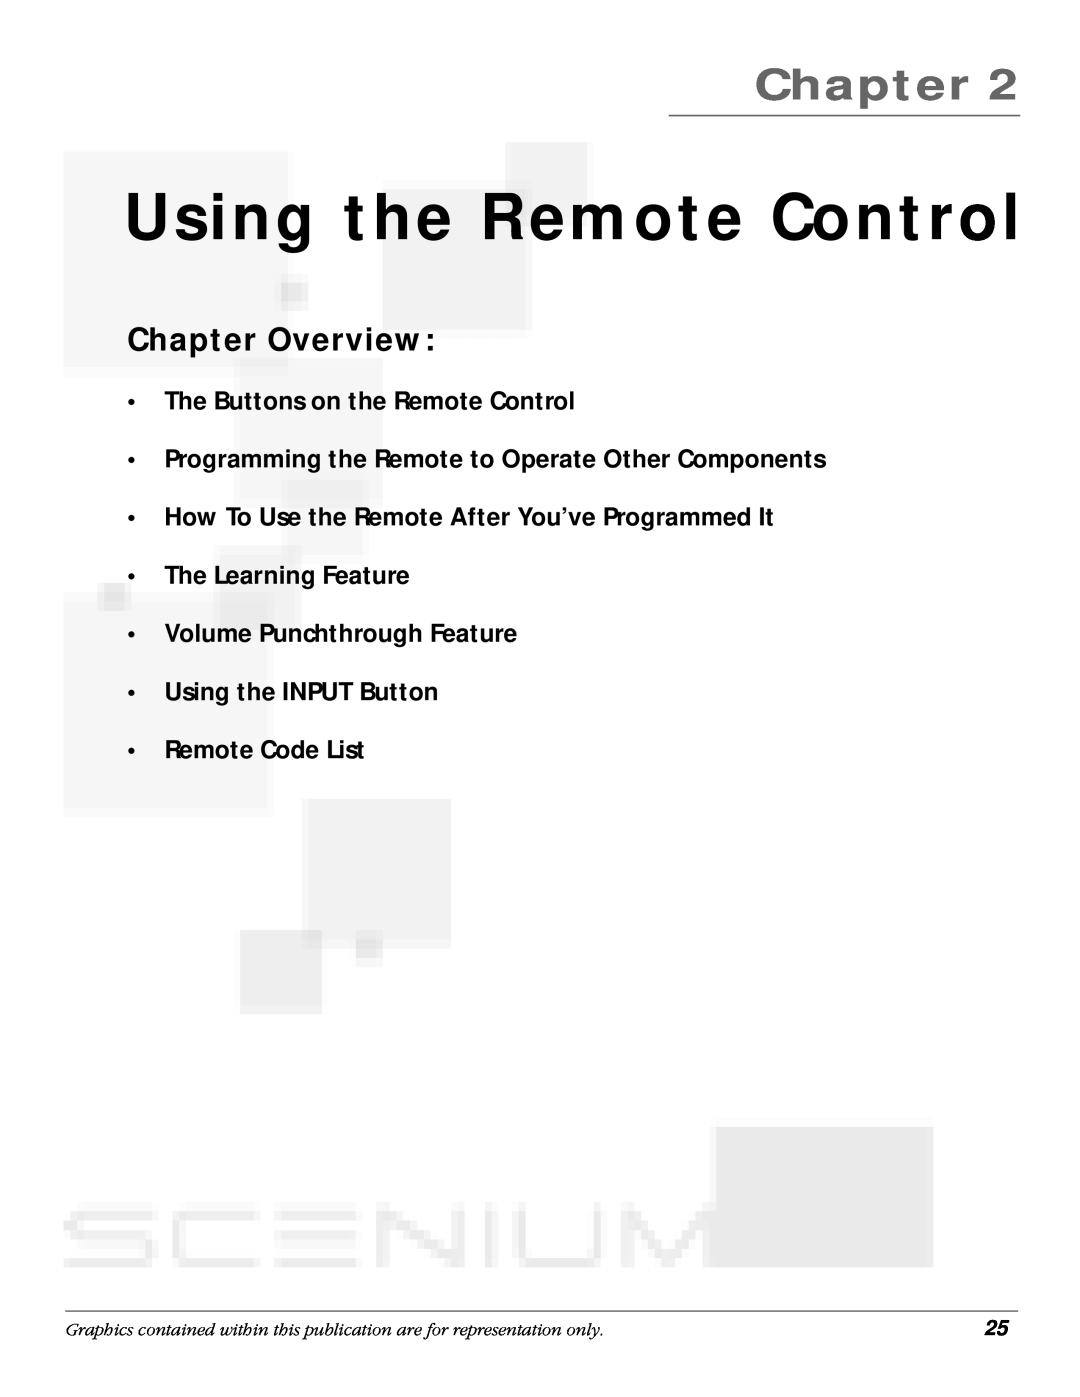 RCA scenium manual Using the Remote Control, The Buttons on the Remote Control, Chapter Overview 